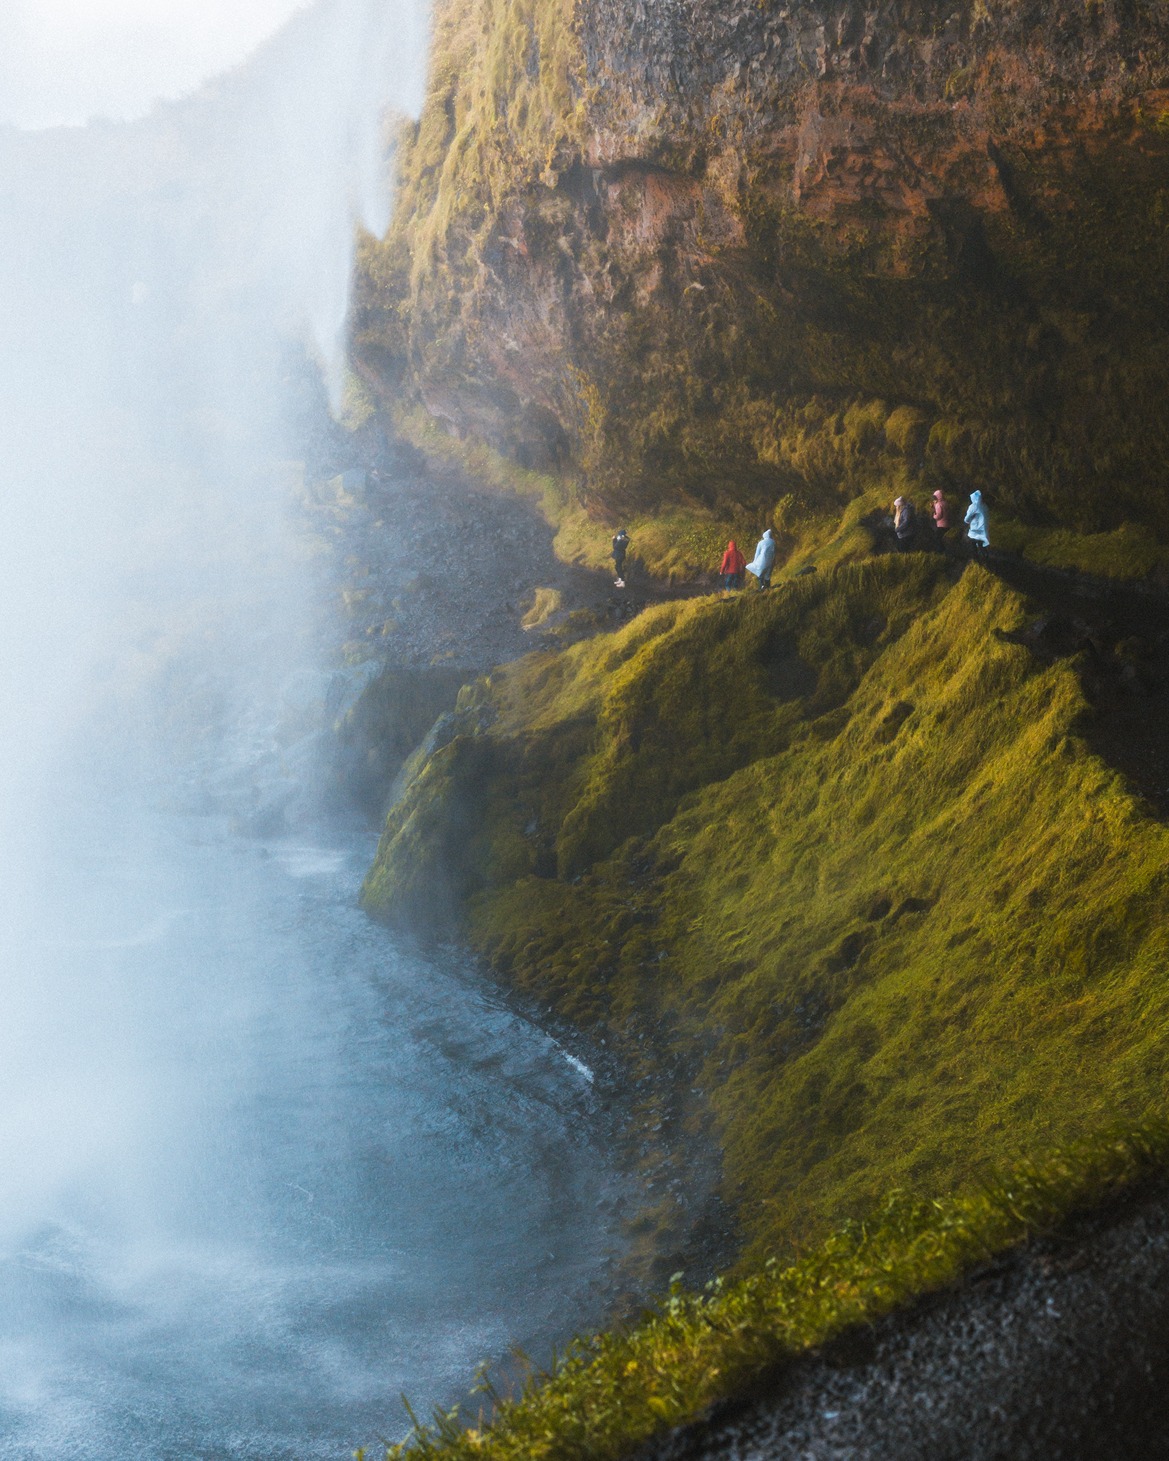 Deep green bluffs next to turquoise sea in a foggy shot of Iceland